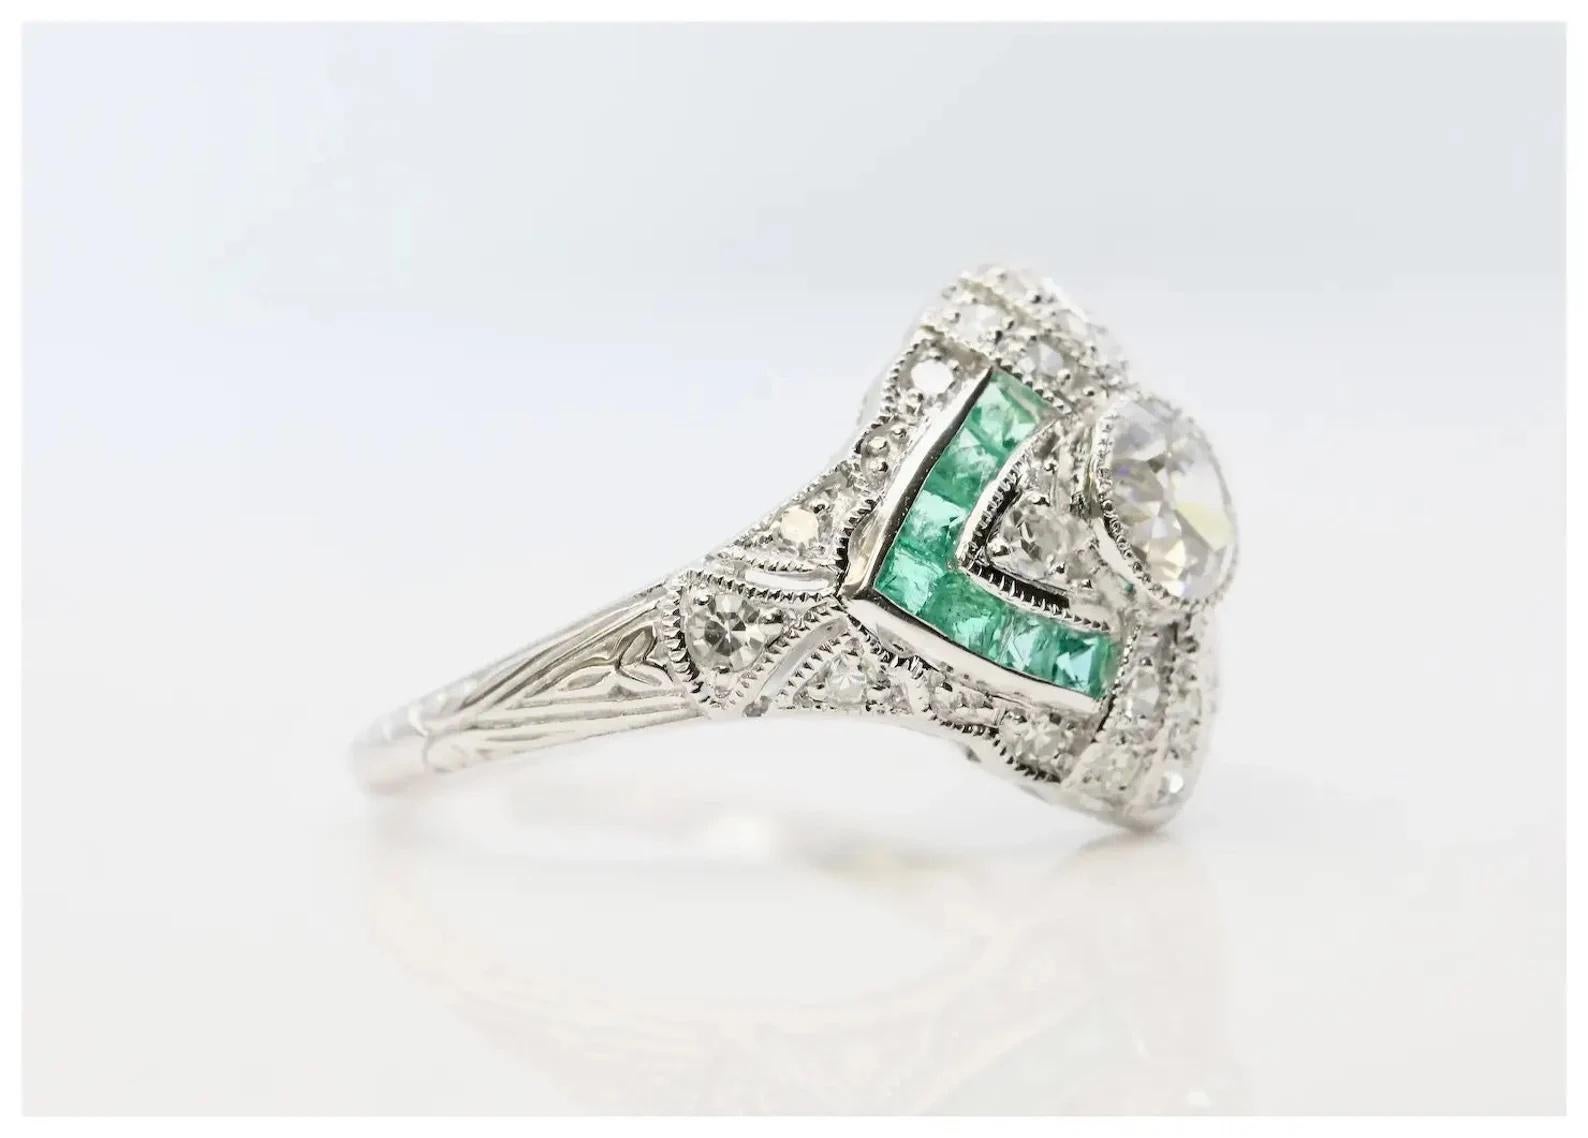 An Art Deco style diamond, and emerald ring crafted in 14 karat white gold.

Centered by a 0.50 carat old European cut diamond of H color, VS2 clarity.

Framed by fourteen French cut emeralds of vivid green color and twenty four pave set